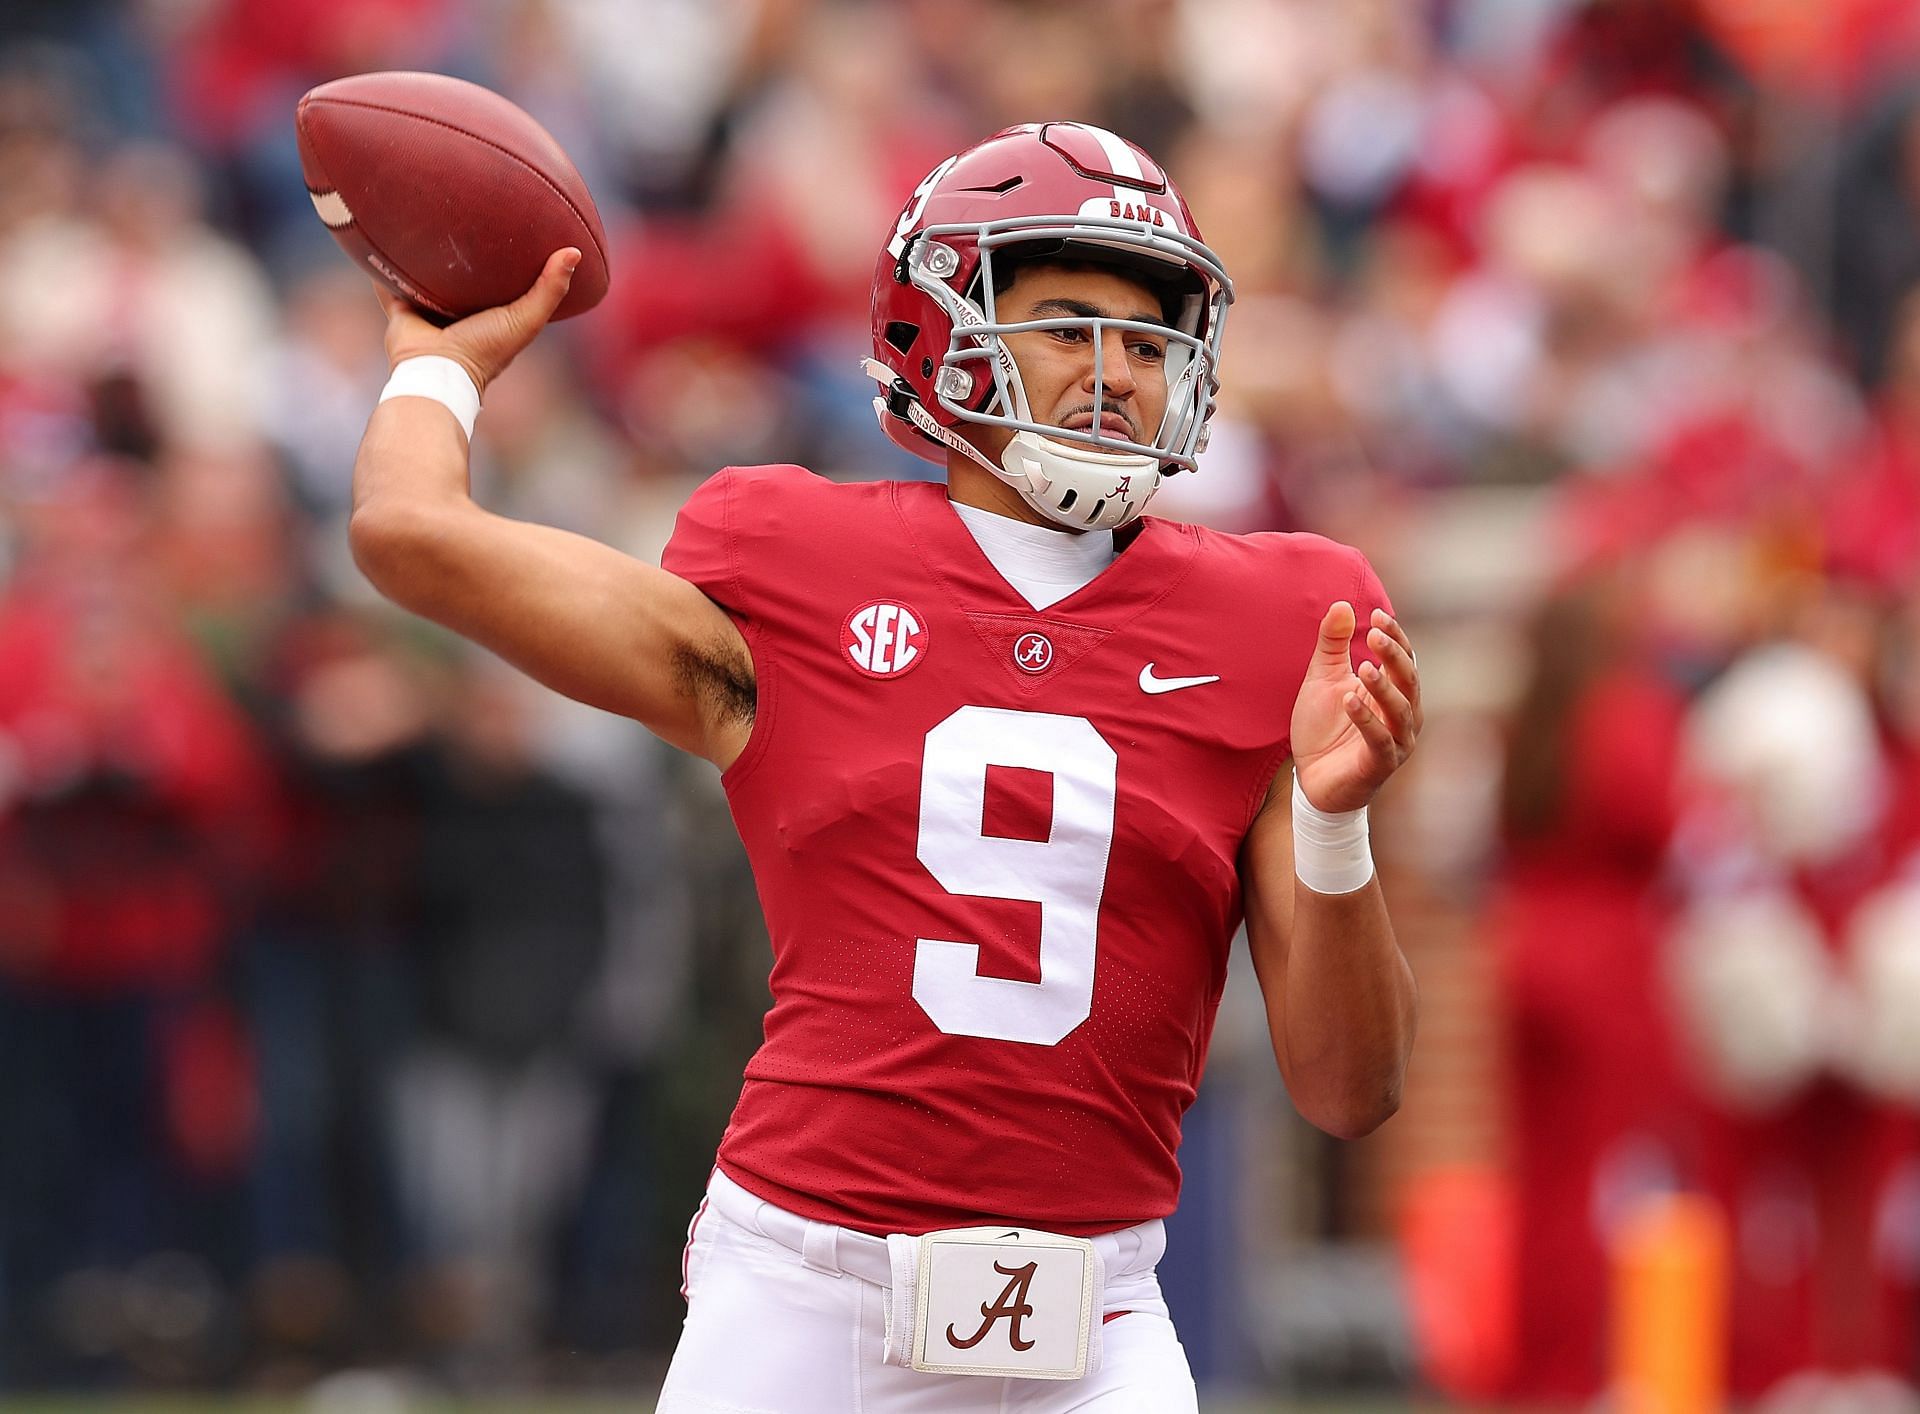 Alabama quarterback Bryce Young is the favorite to go first in the 2023 NFL draft